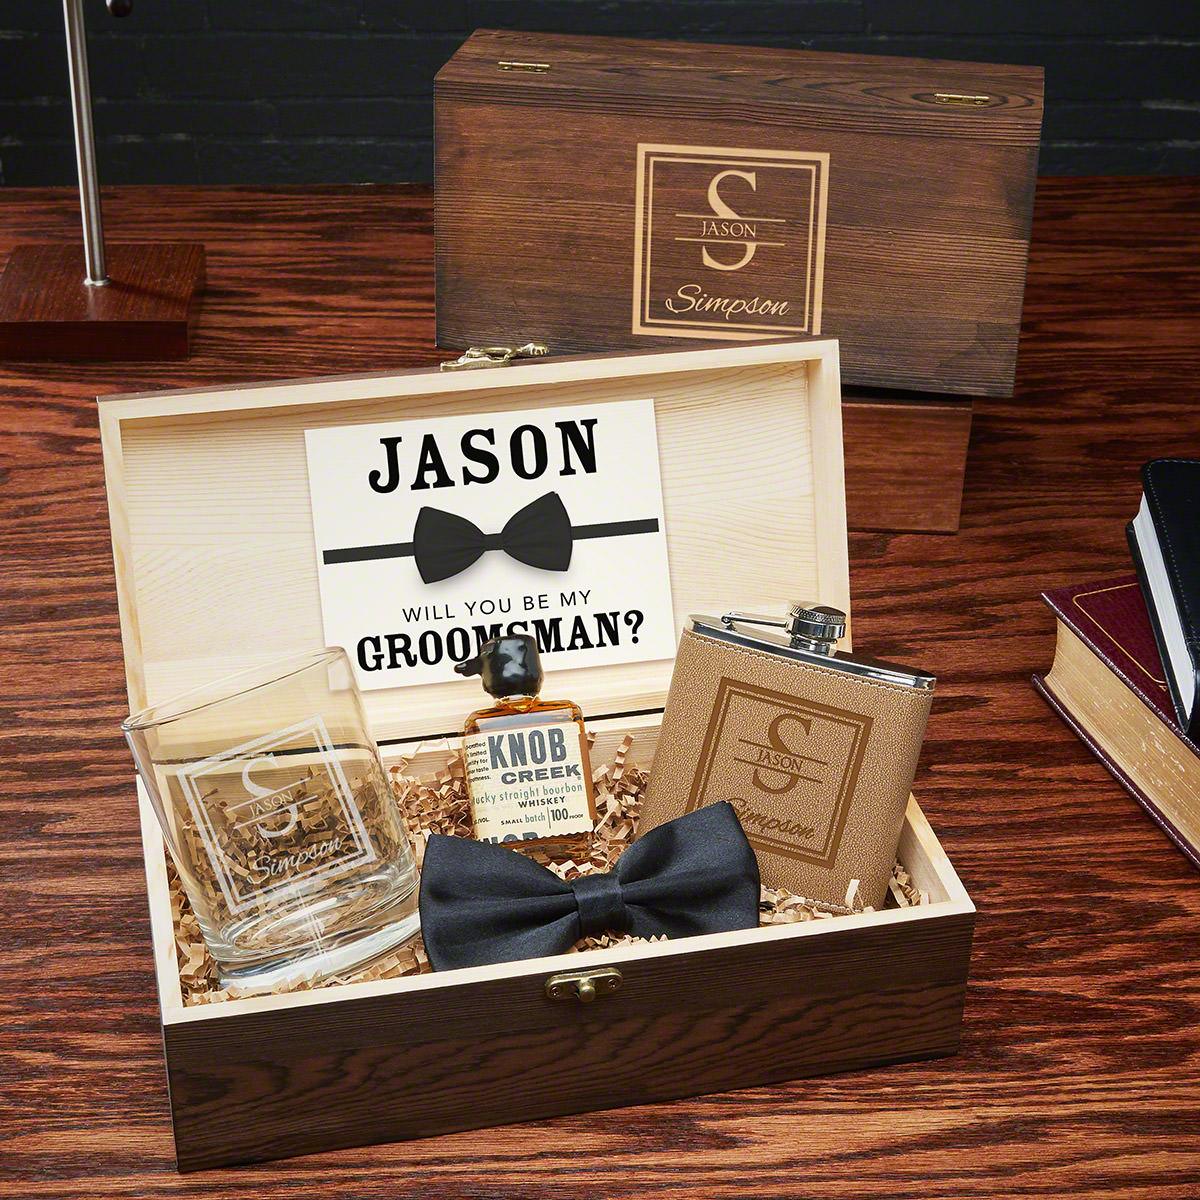 Groomsman Gift Personalised Engraved Wooden Bottle Opener with Box Included Wedding Gift Best Man Groom Wedding Favours